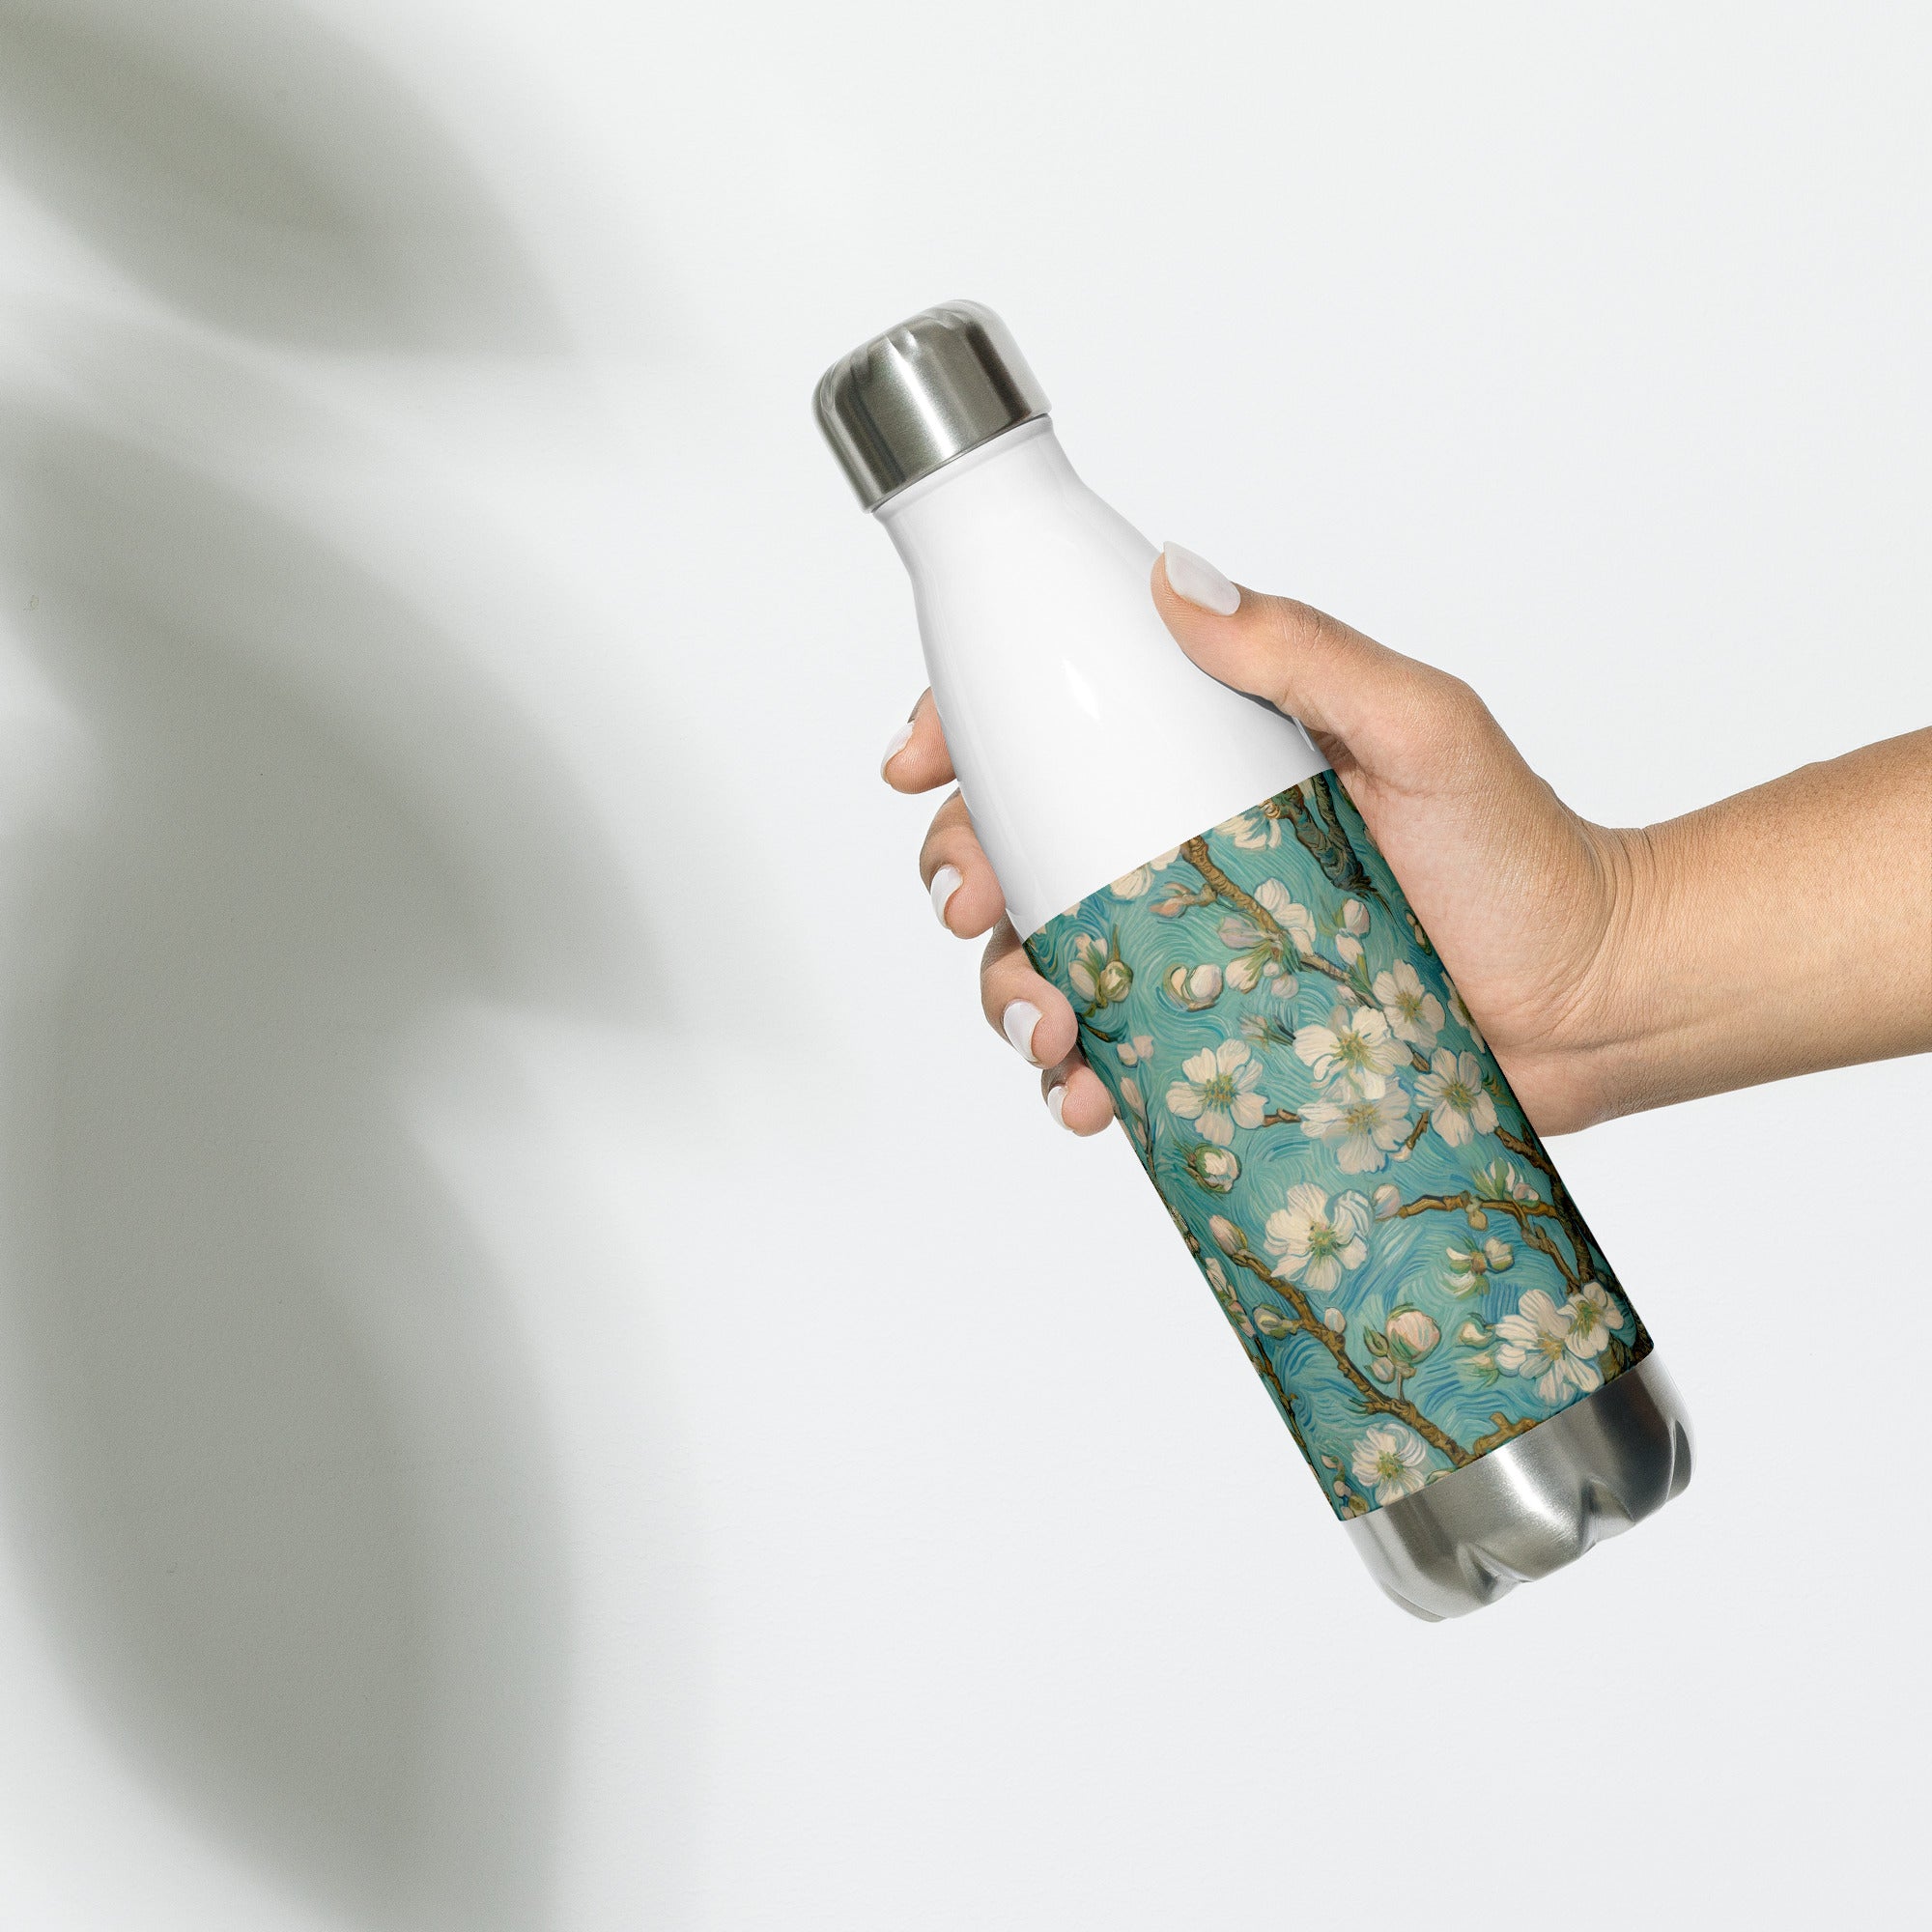 Vincent van Gogh 'Almond Blossom' Famous Painting Water Bottle | Stainless Steel Art Water Bottle